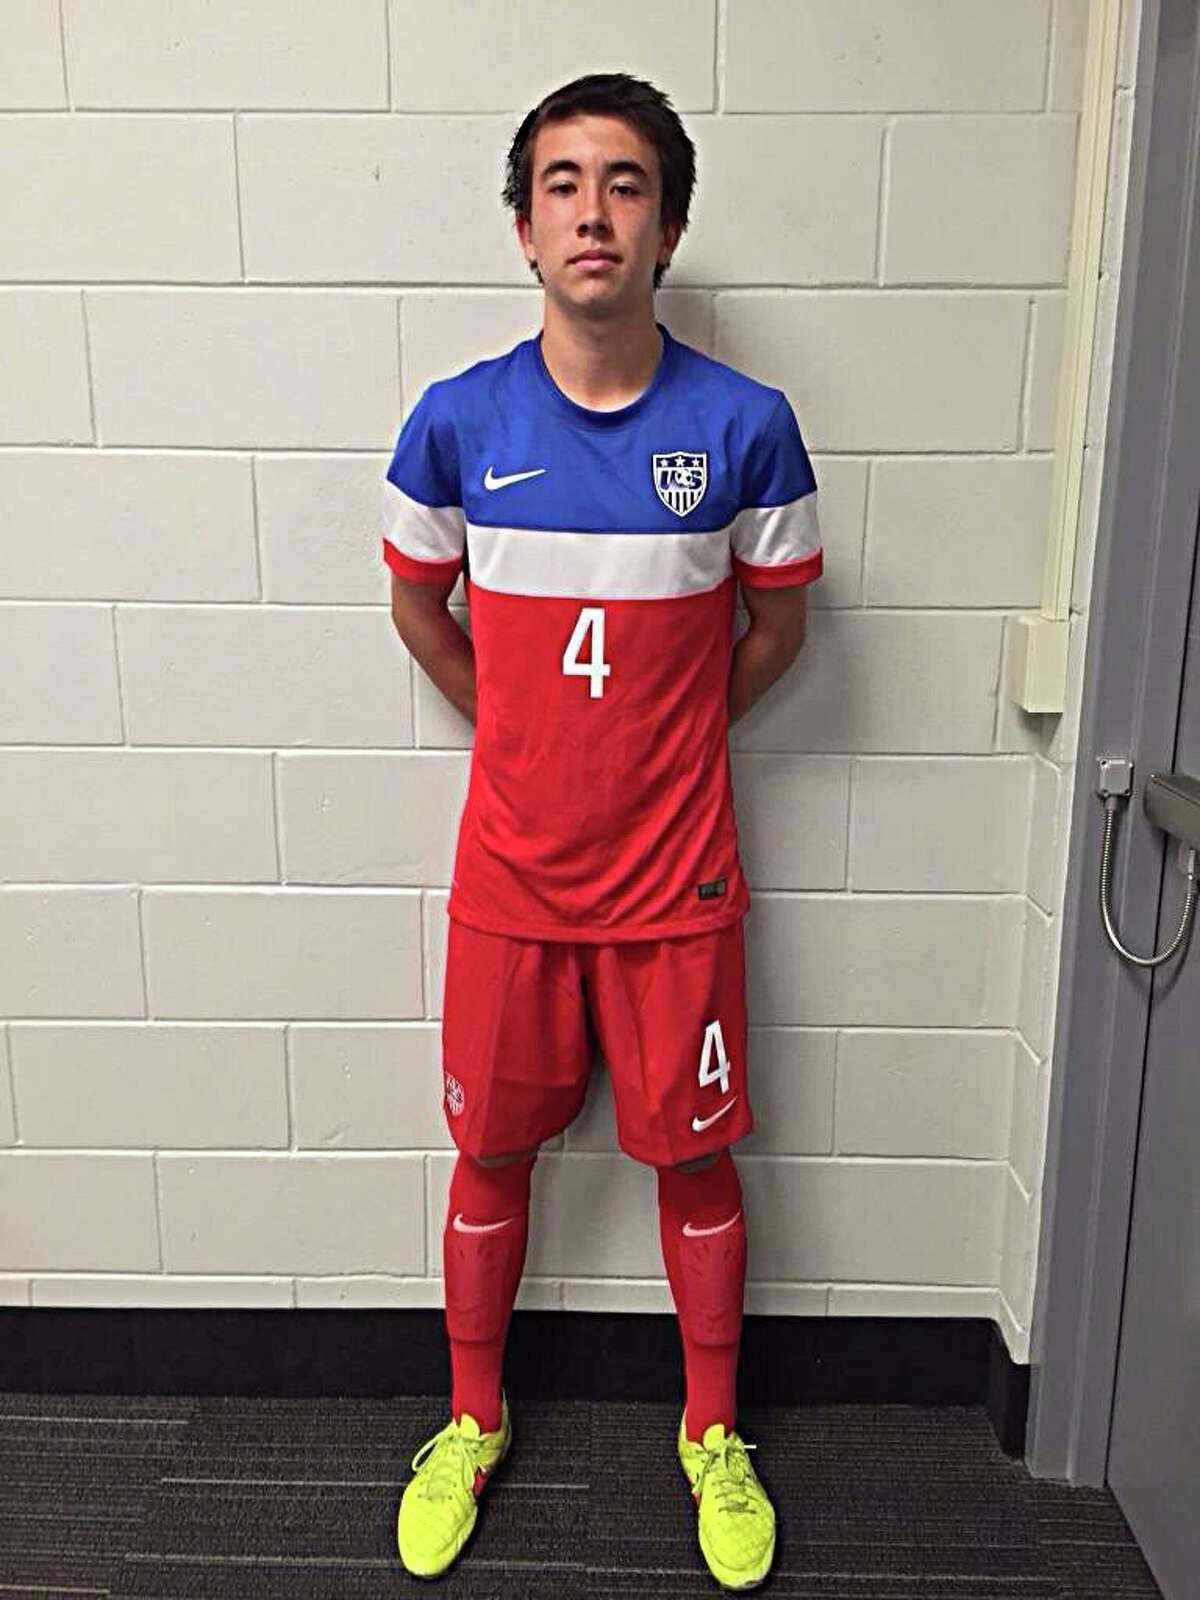 Tyler Shaver, a Greenwich resident and Brunswick School student, is a member of the U.S. national soccer under-15 team that traveled to Argentina and played against other national teams. He is currently on a training trip with the national team in England.